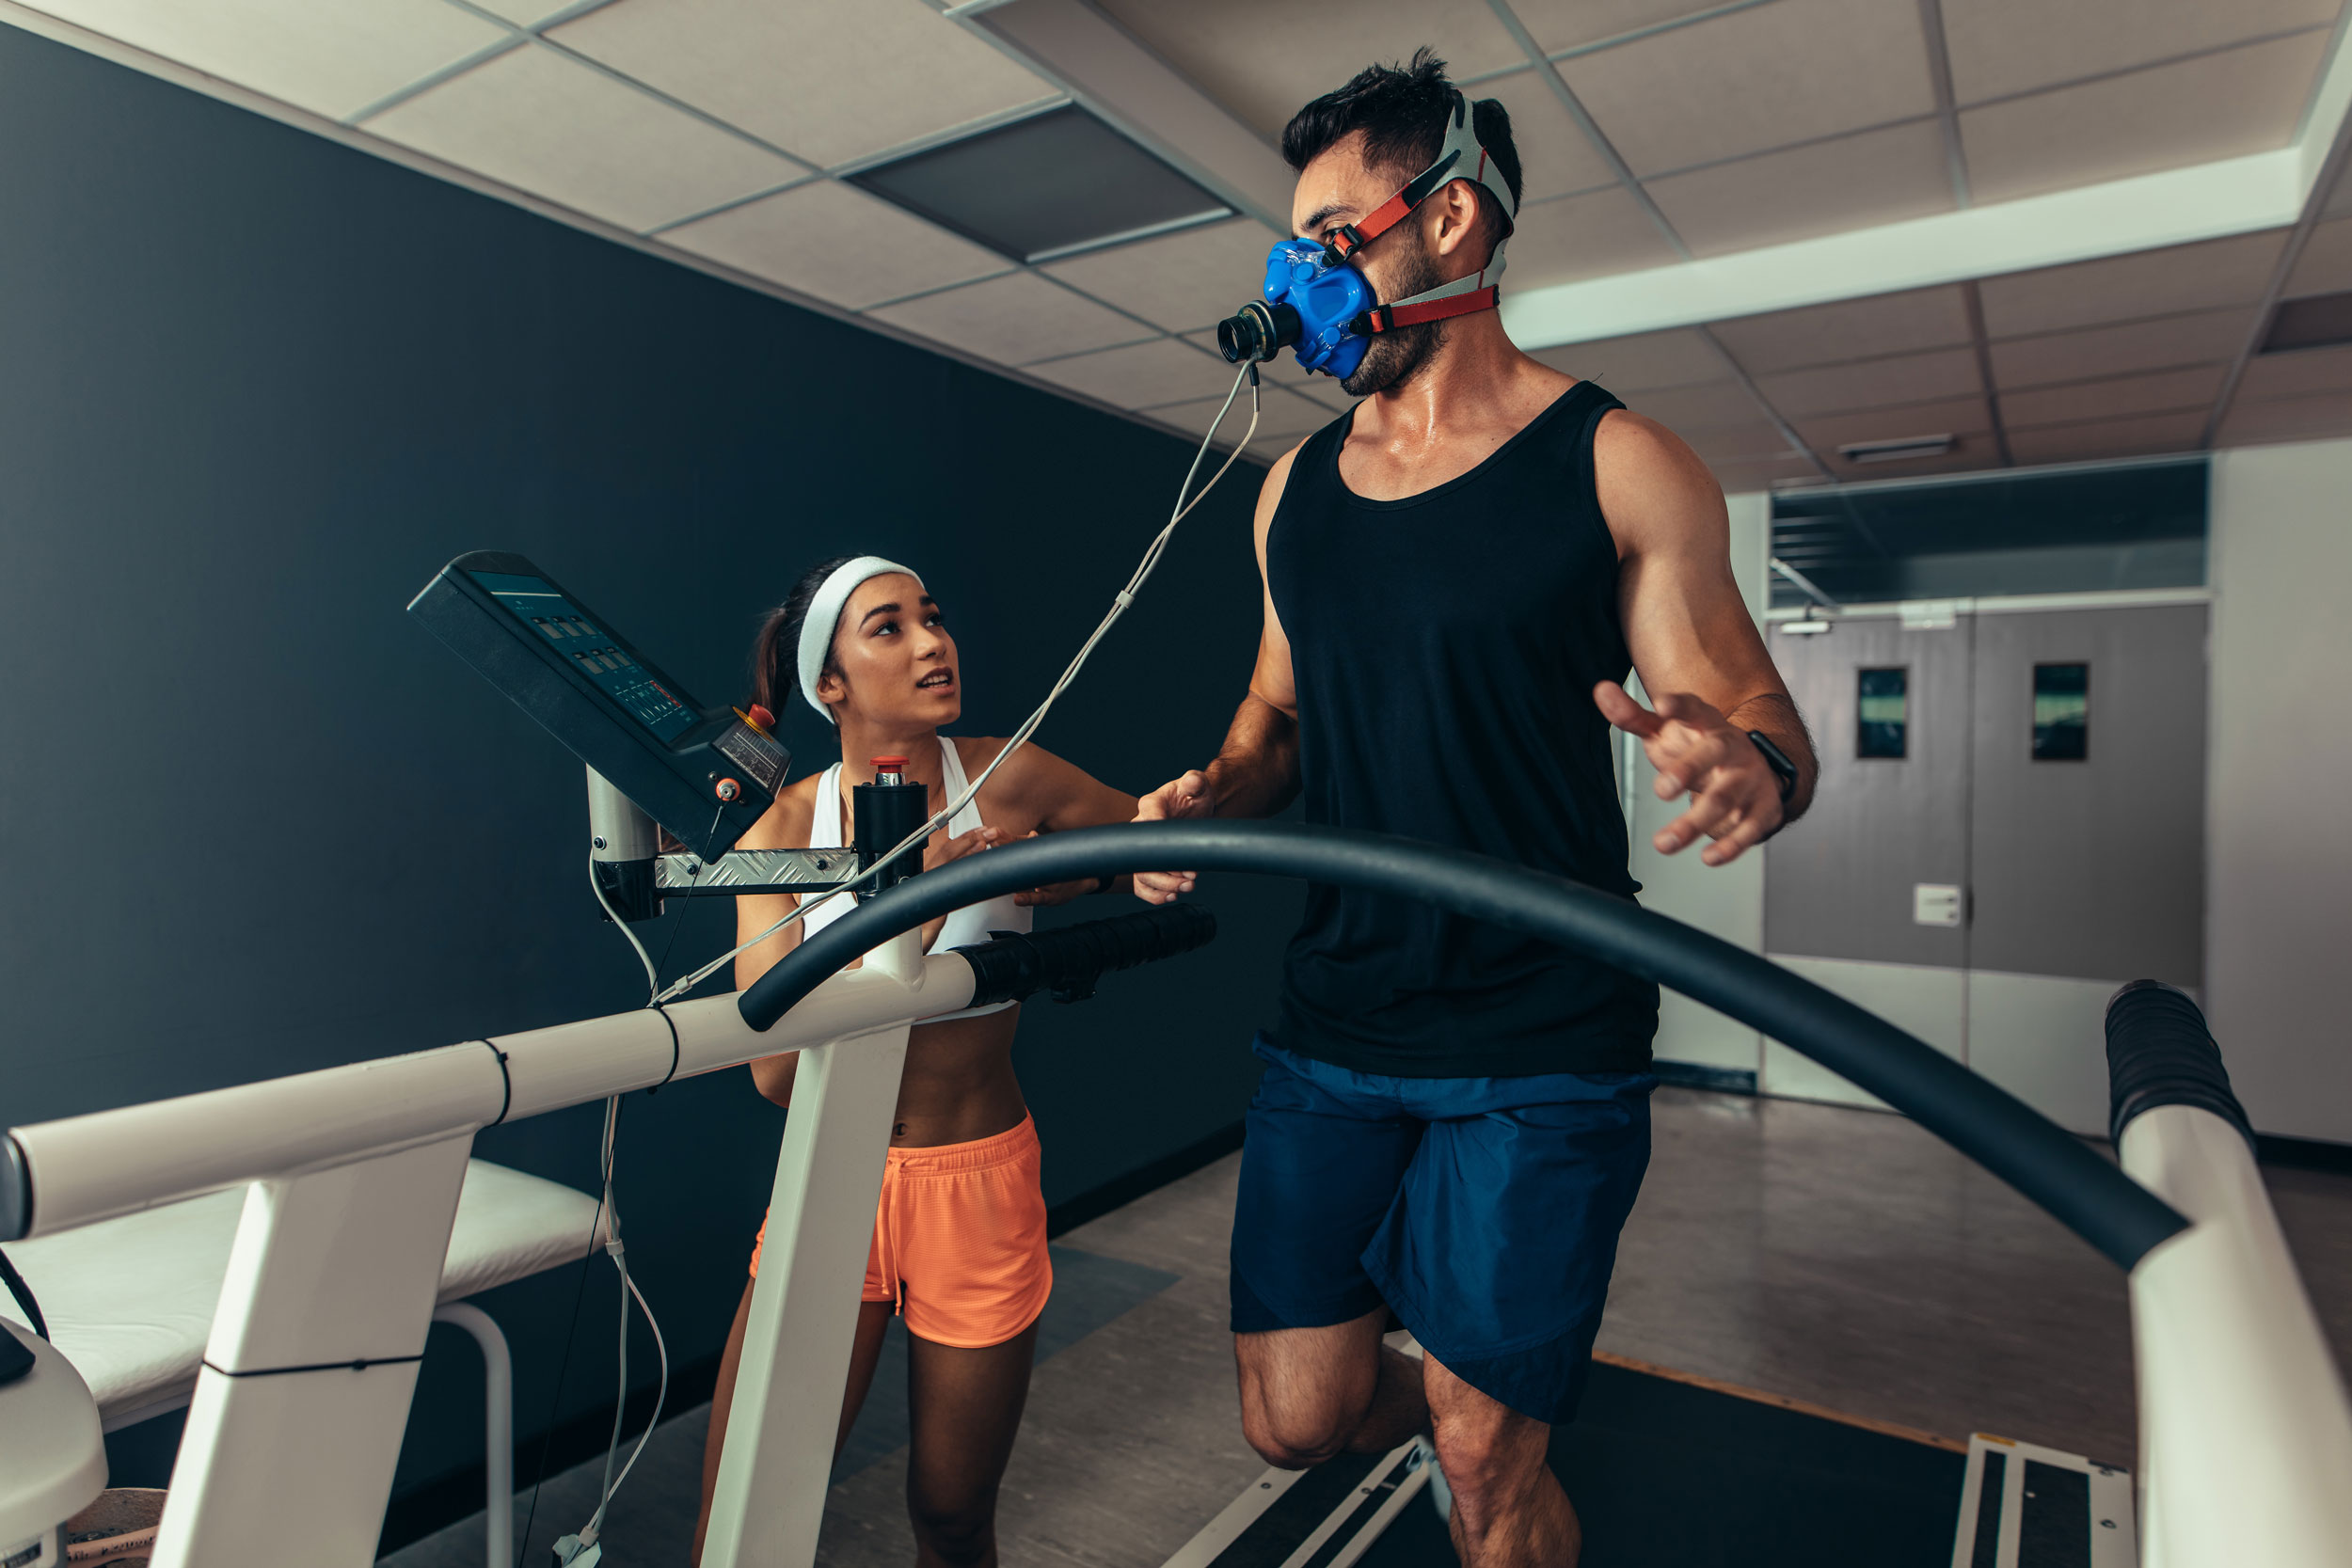 Athlete wearing monitoring equipment, running on a treadmill, accompanied by another athlete